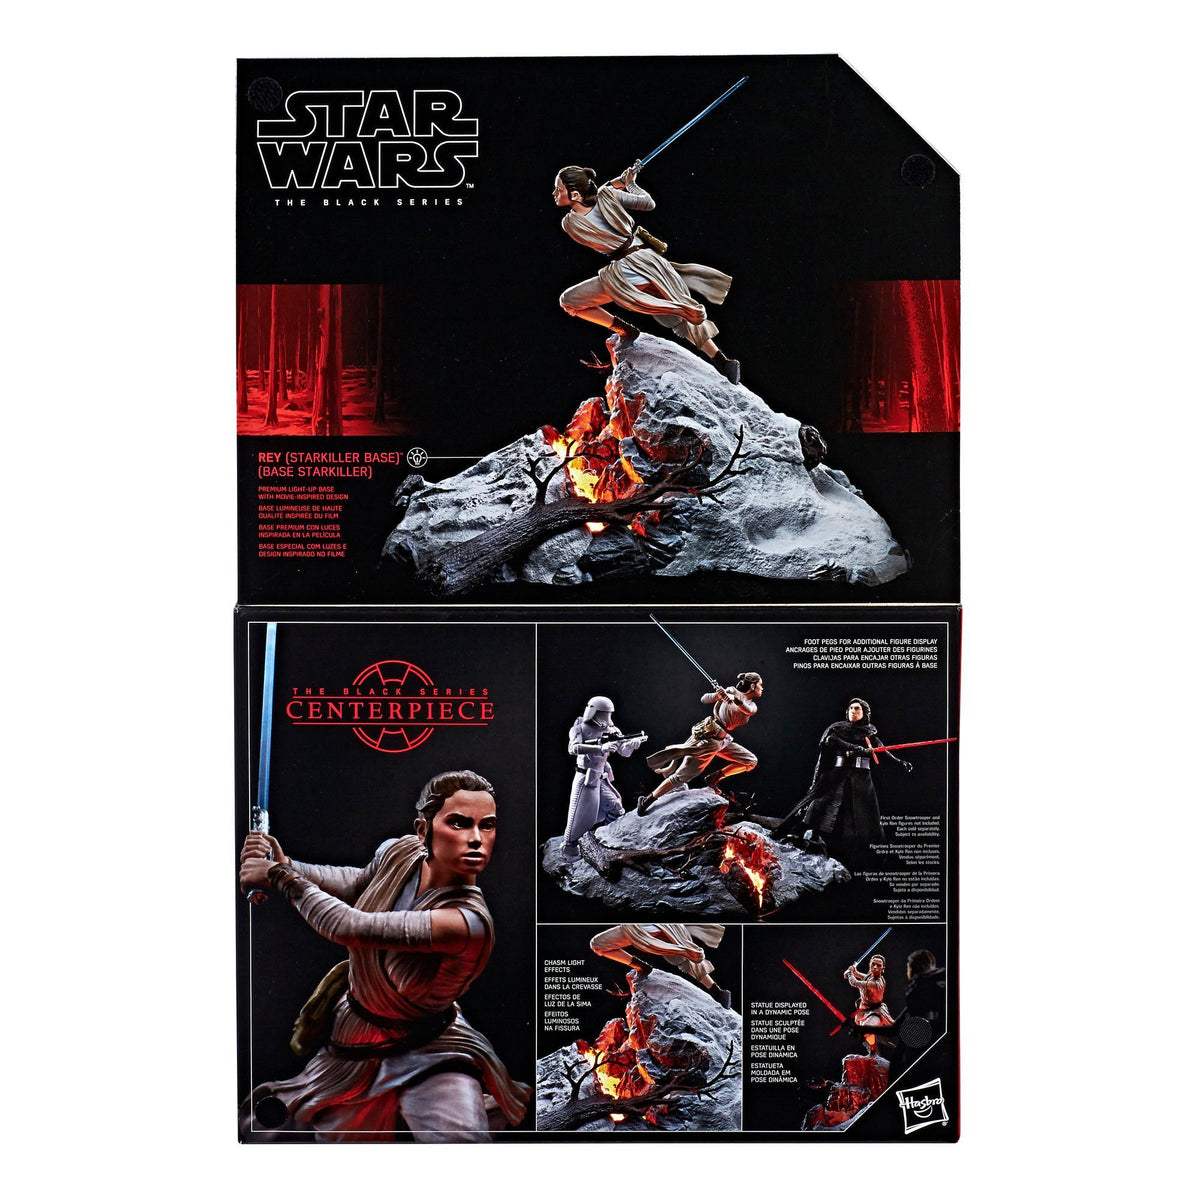 Hasbro Star Wars Black Series Rey (Starkiller Base) Action Figure   BobaKhan Toys - Vintage and New Action Figures, Toys and Collectibles!